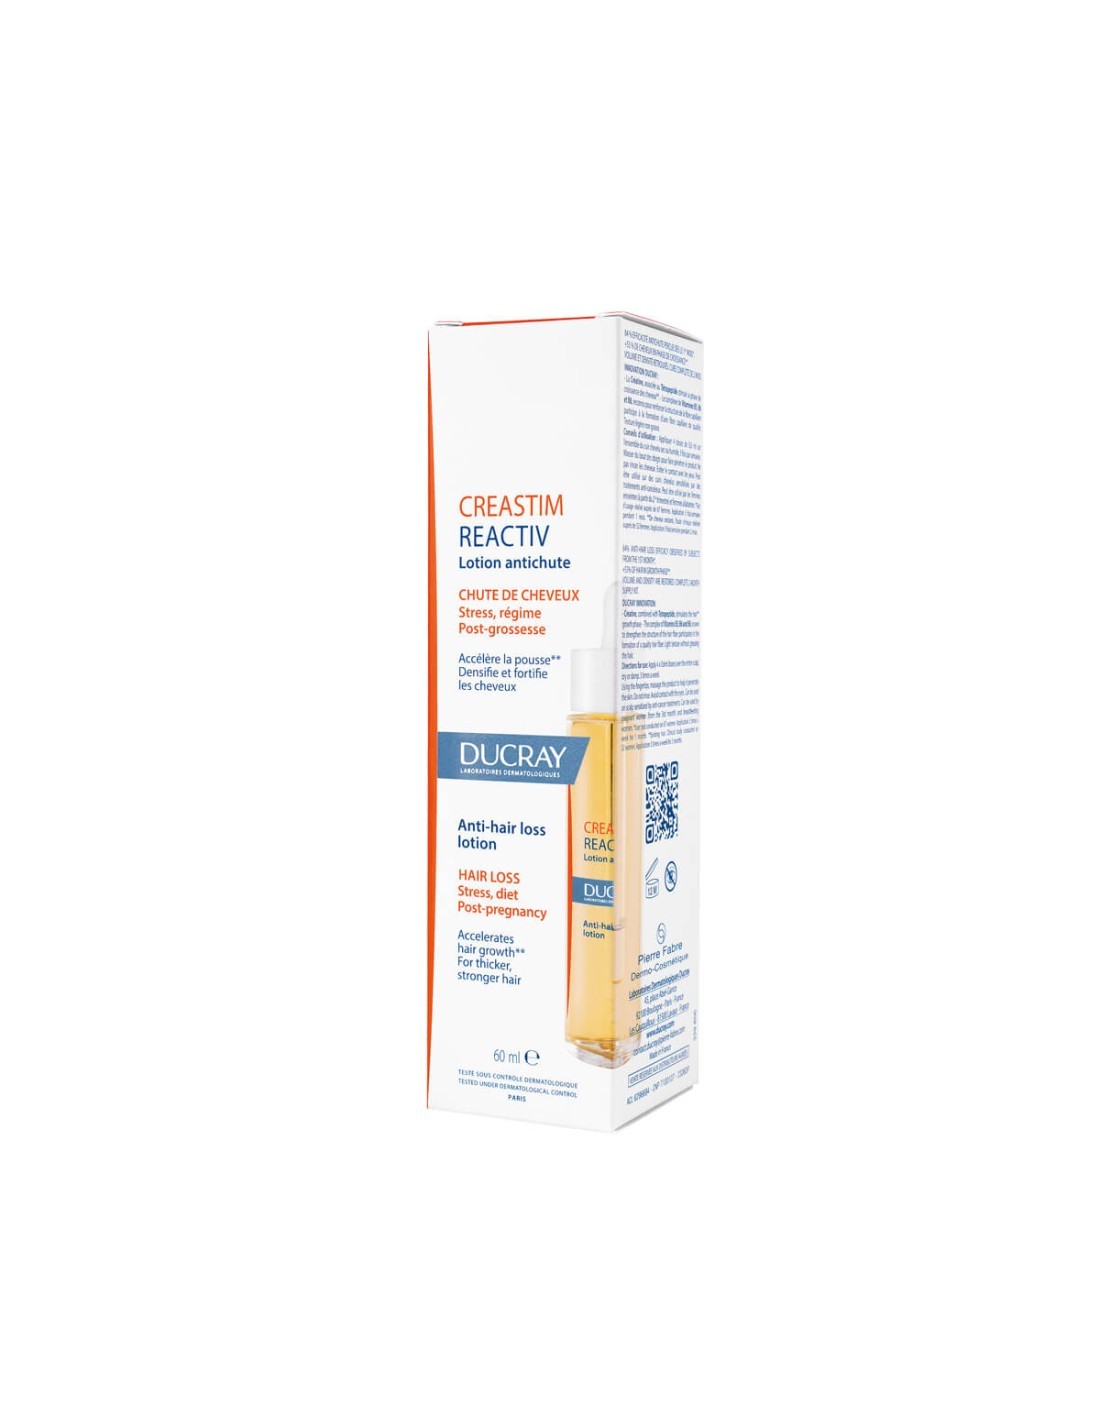 Ducray~Creastim Reactiv~Hair Loss Lotion~60ml~Excellent Quality Hair Care  - $63.99